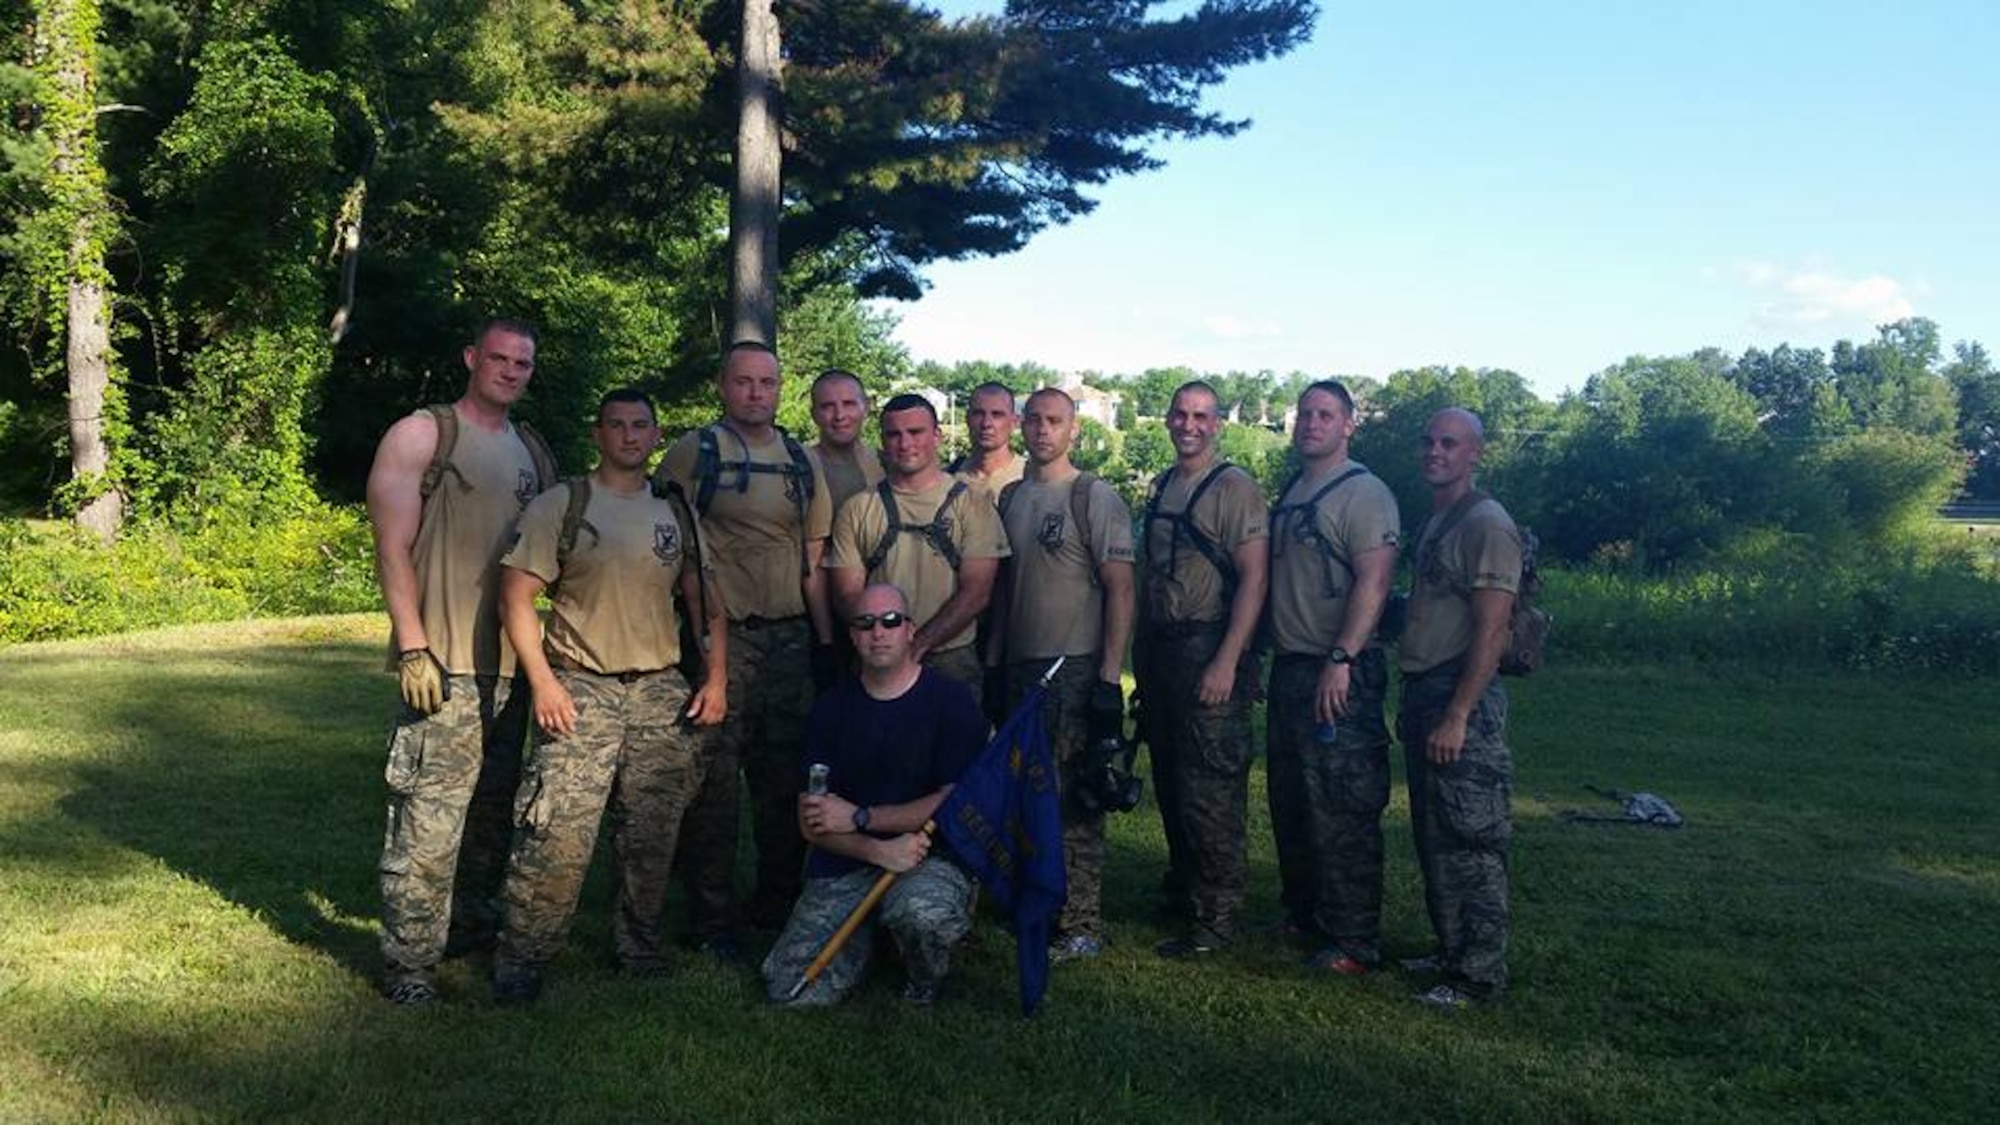 The 2015 103rd Security Forces Squadron SWAT Challenge team poses for a group shot following a grueling challenge part of the annual CT SWAT Challenge at two venues, the State Police Metacon Range in Simsbury and the MDC Reservoir in West Hartford, Conn., Sept. 17-21, 2015.